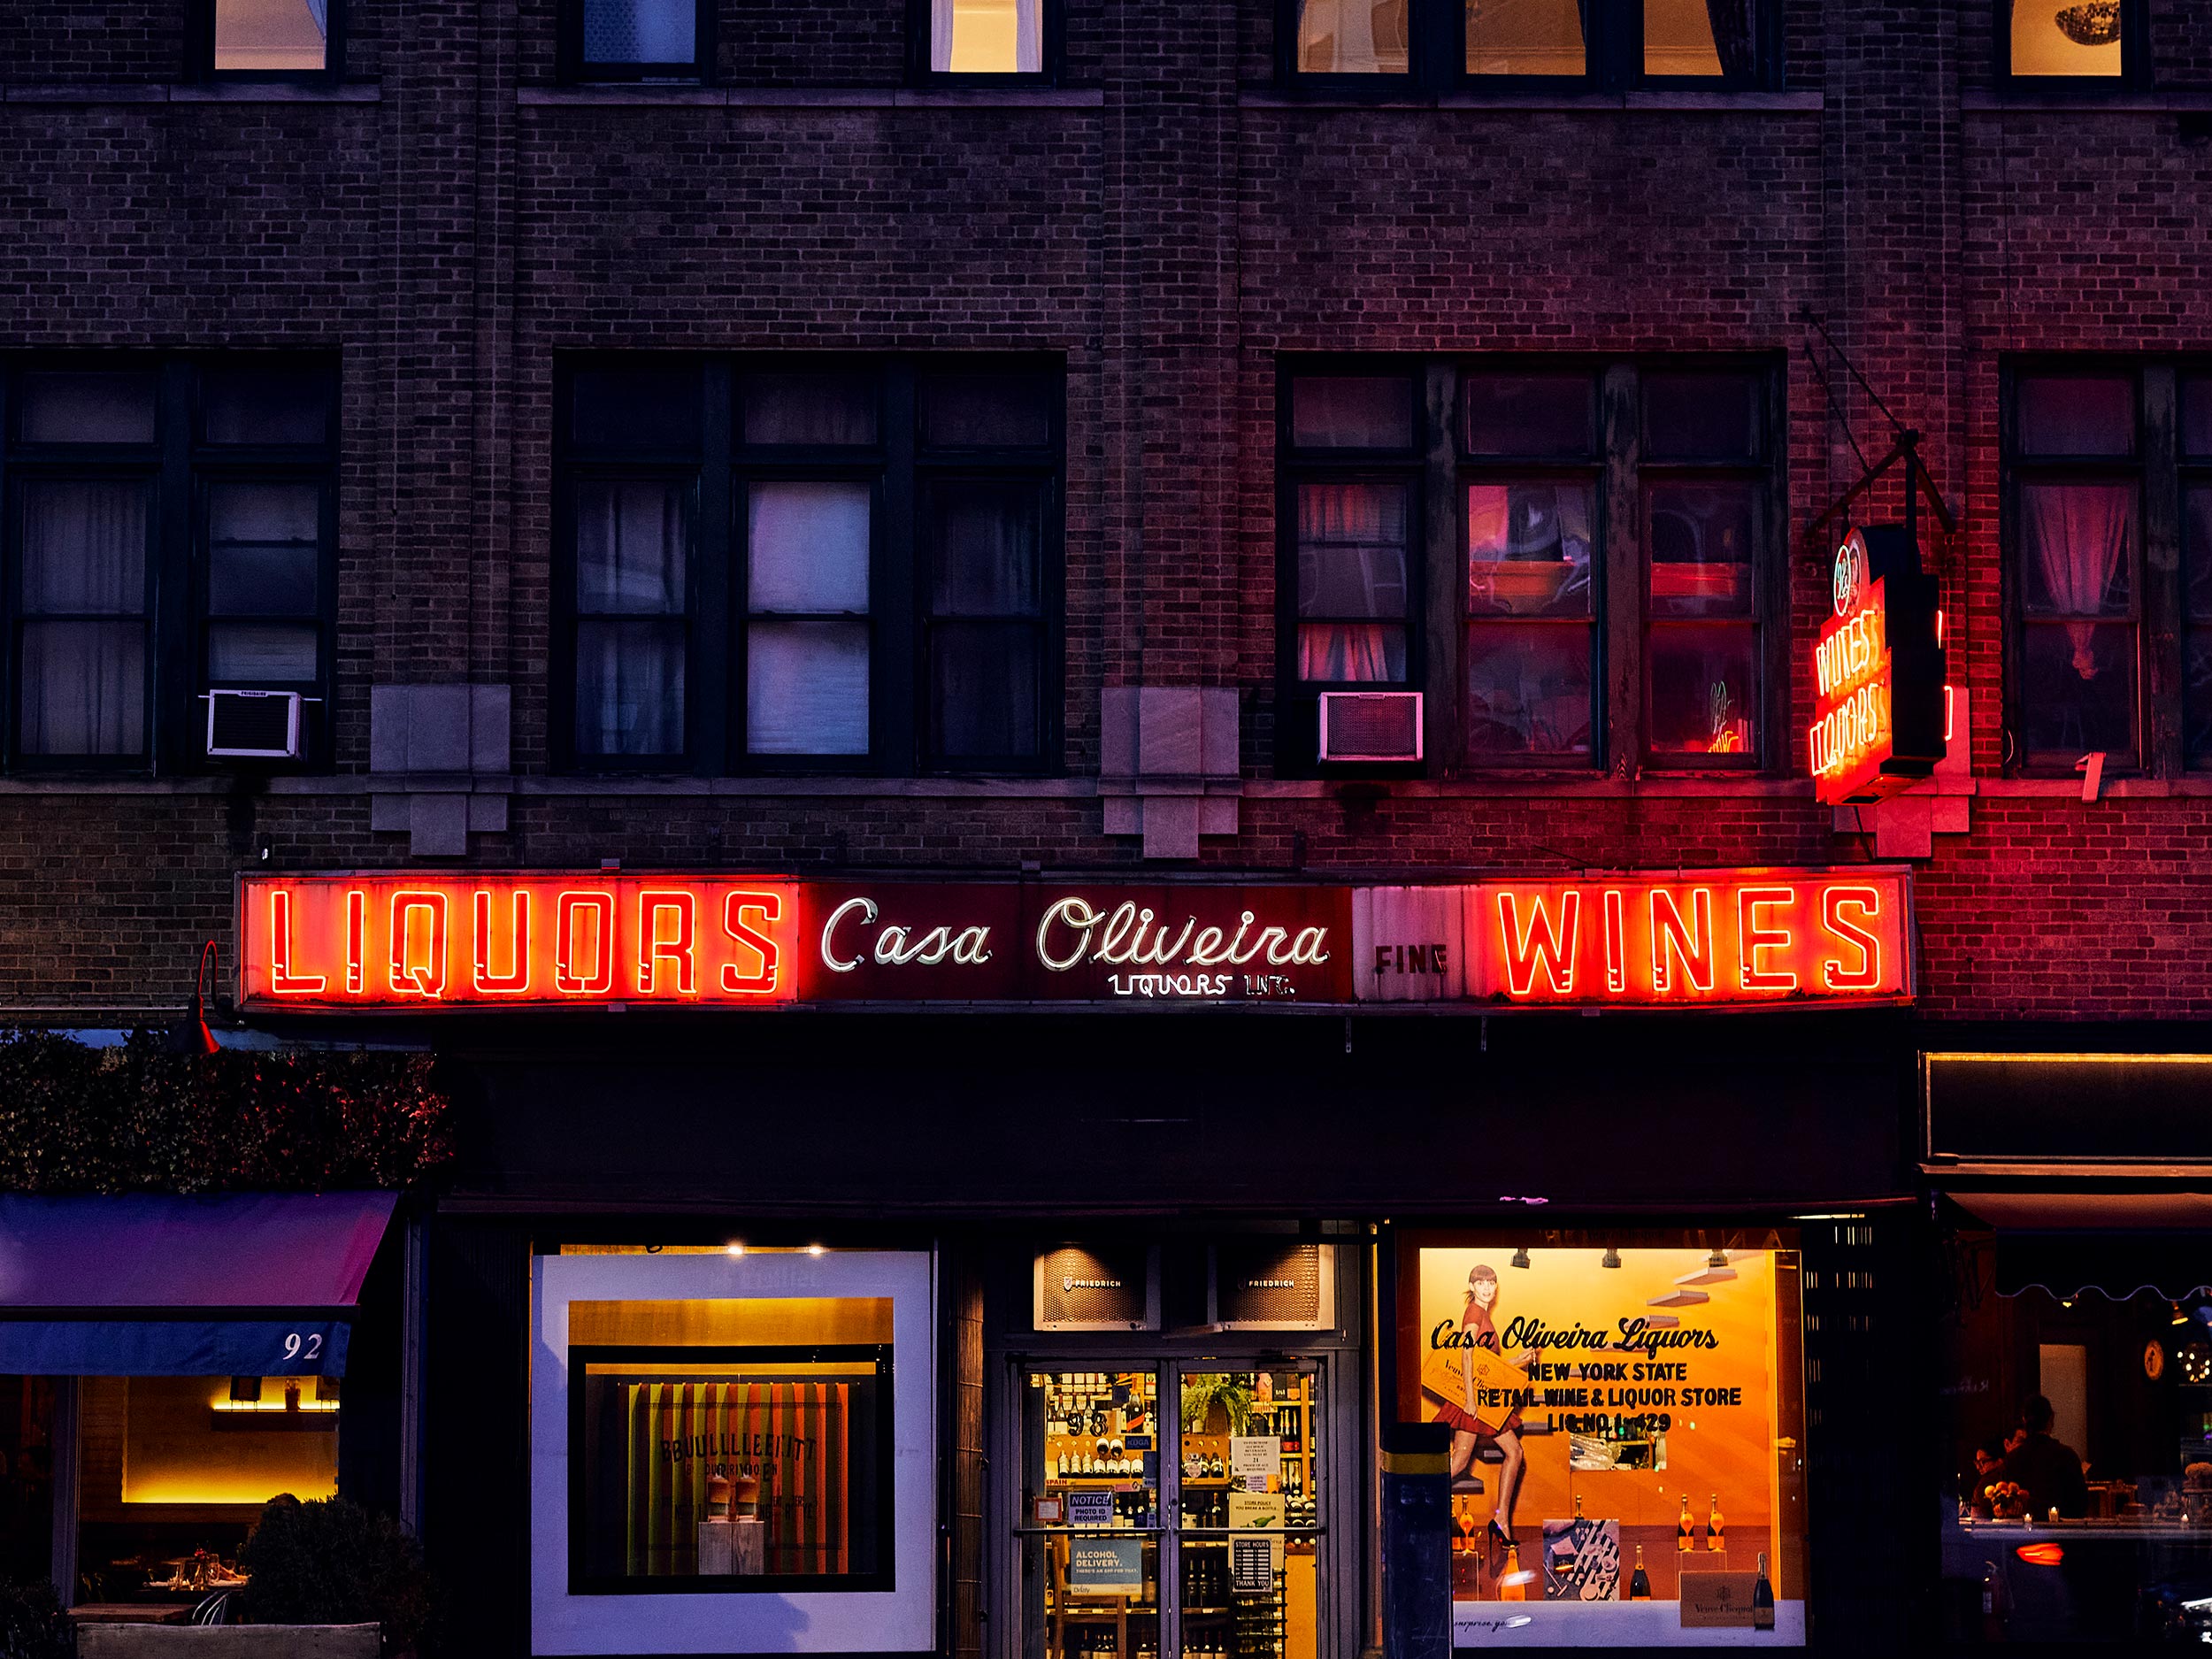 New York City liquor store at night with neon sign photographed by Nico Schinco